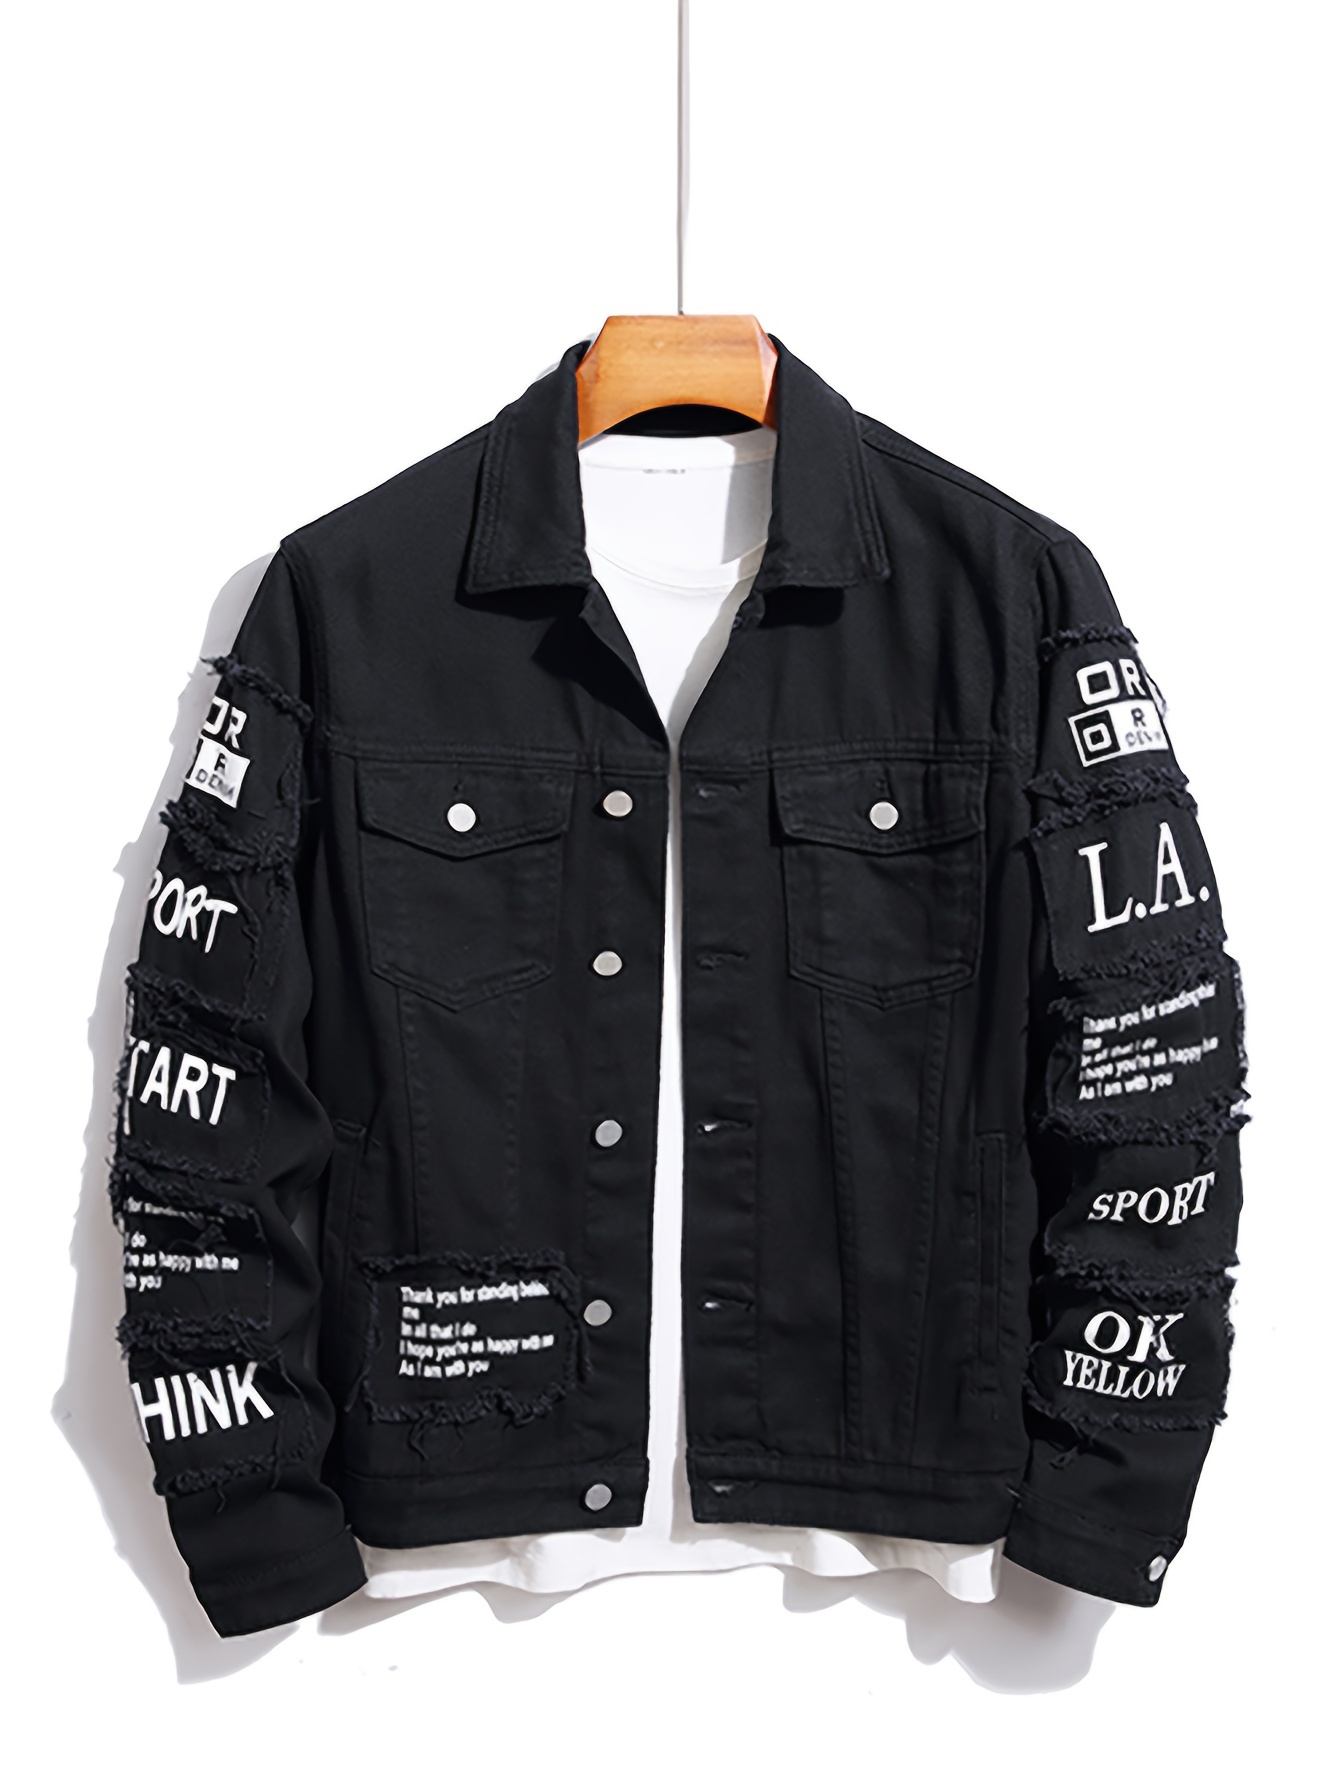 Fashionable jean jacket back patch For Comfort And Style 